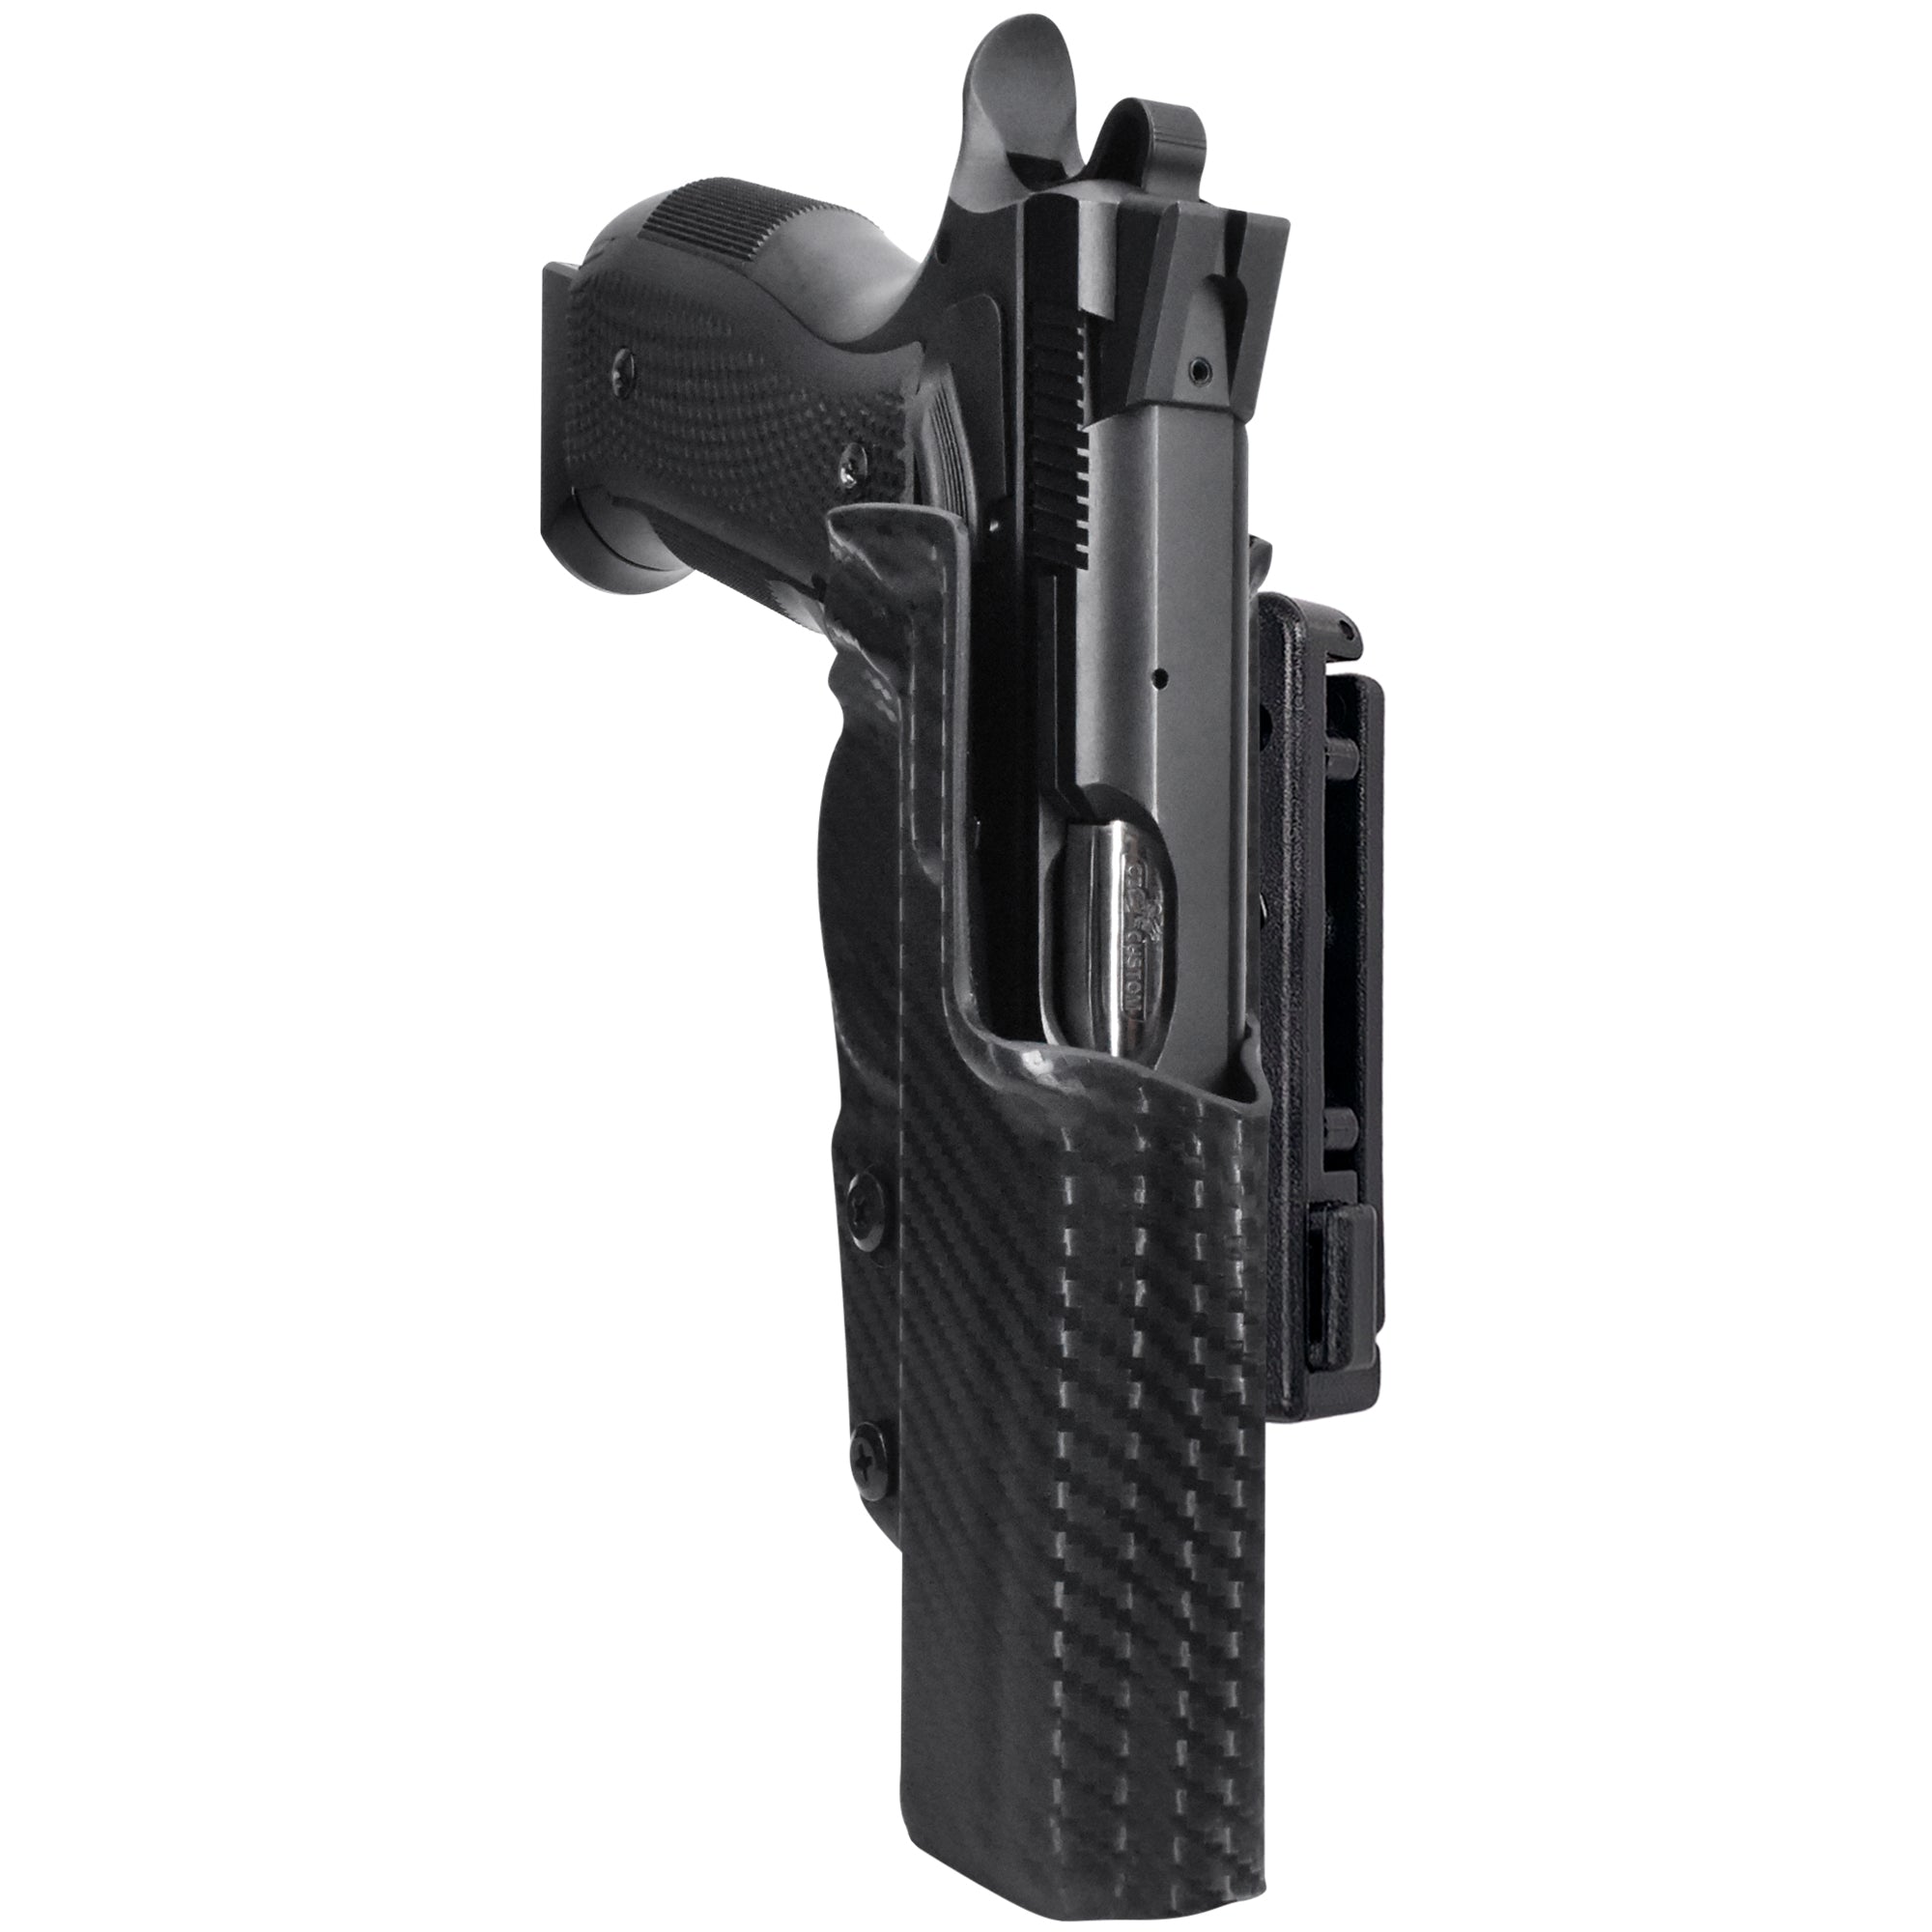 CZ A01-LD Pro IDPA Competition Holster in Carbon Fiber